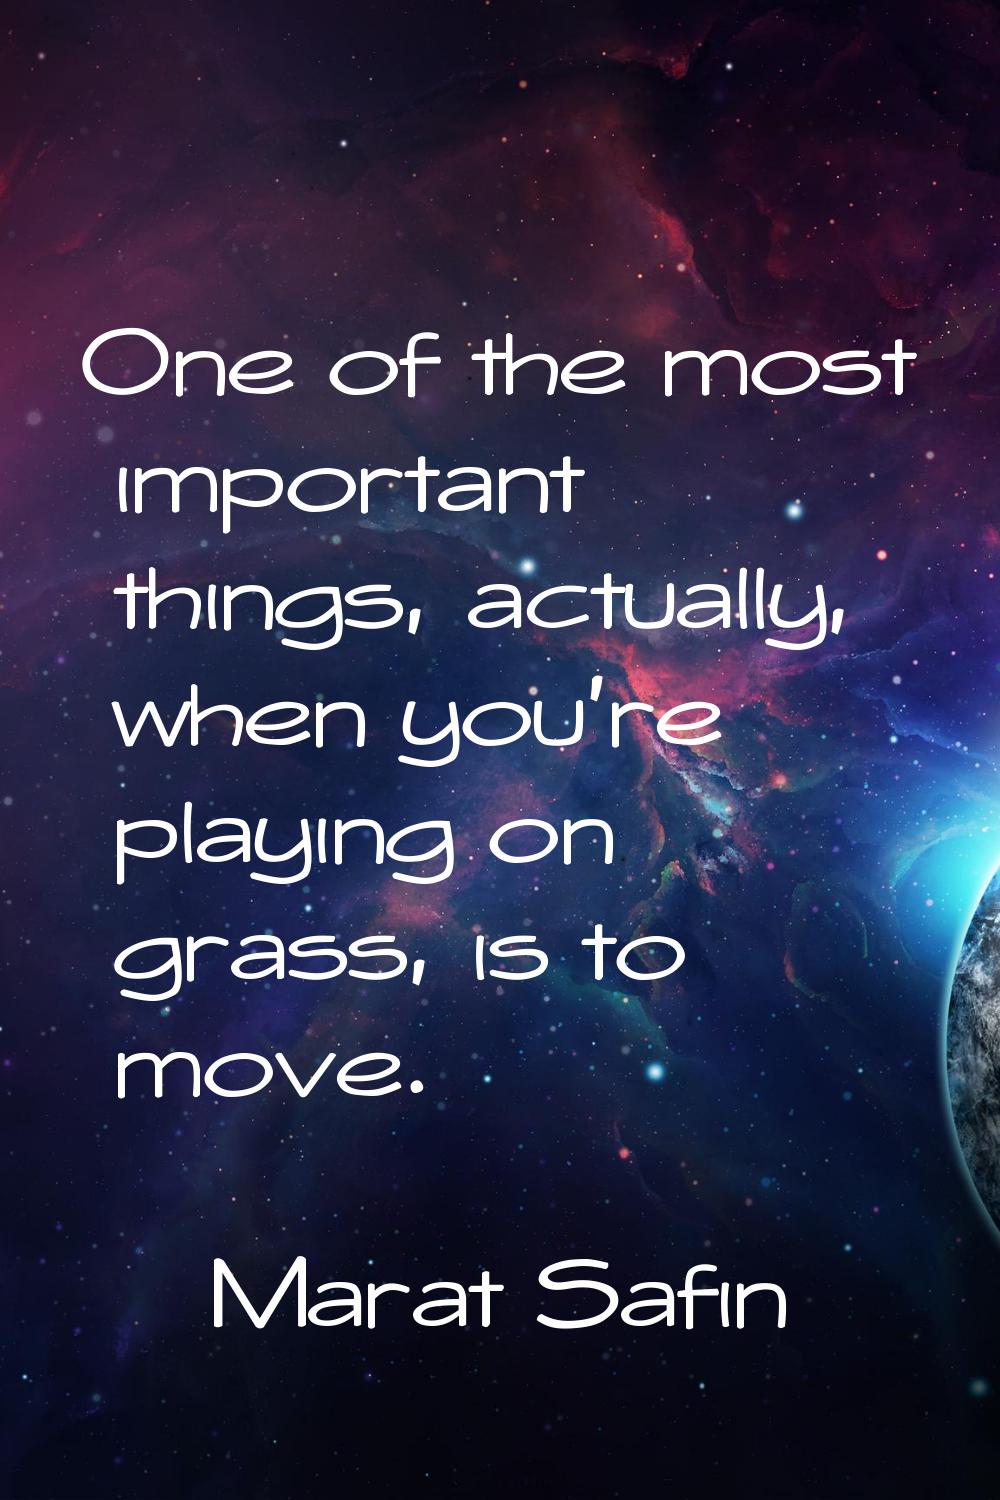 One of the most important things, actually, when you're playing on grass, is to move.